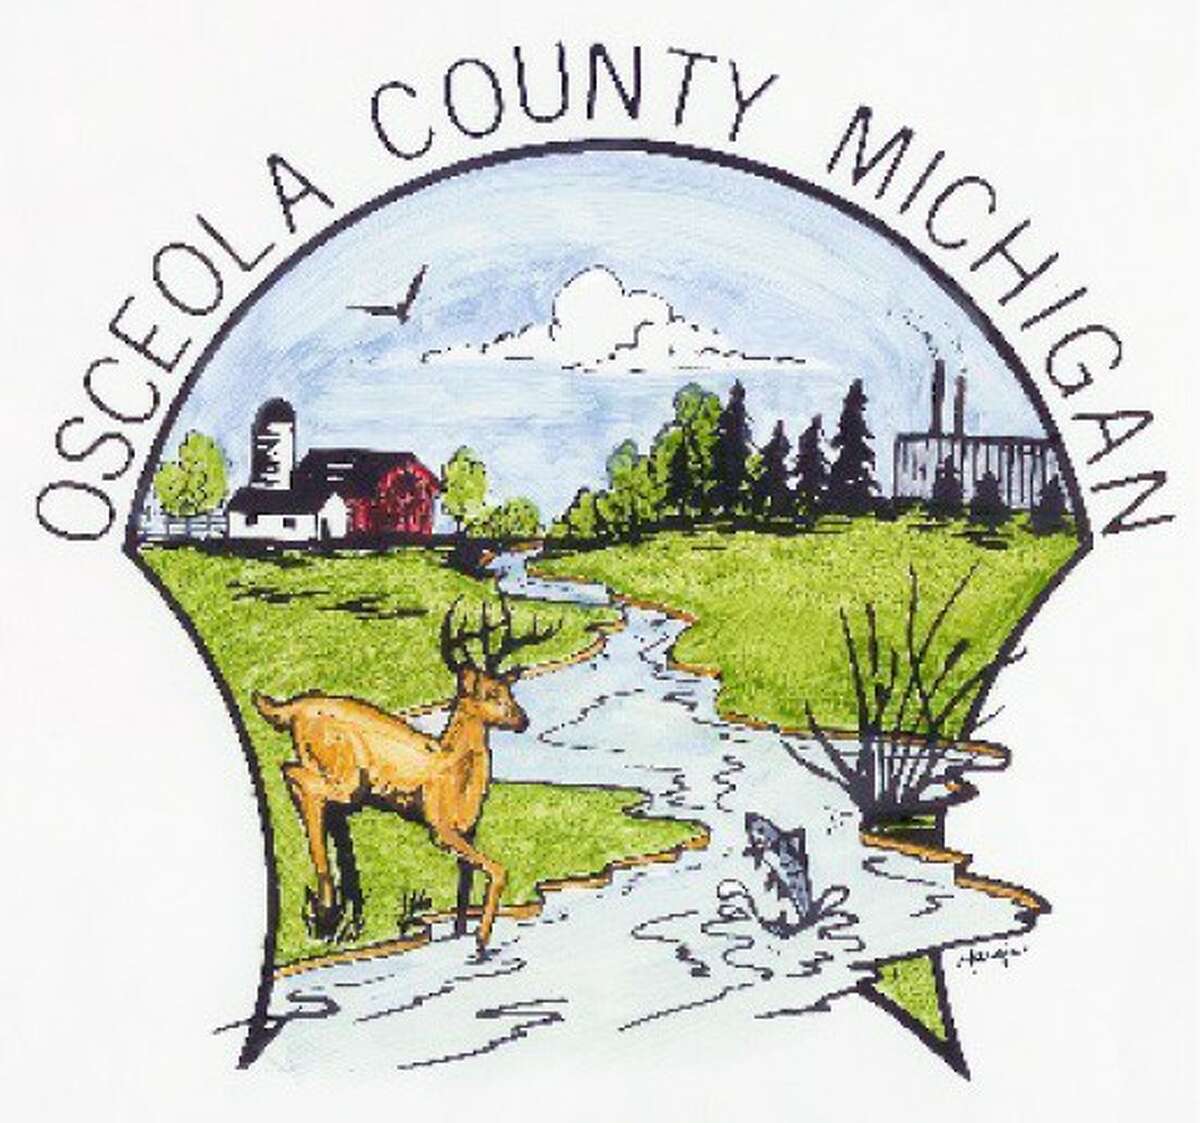 The Osceola County board of commissioners has approved a contract with Middle Michigan Development Corporation for economic development services.  